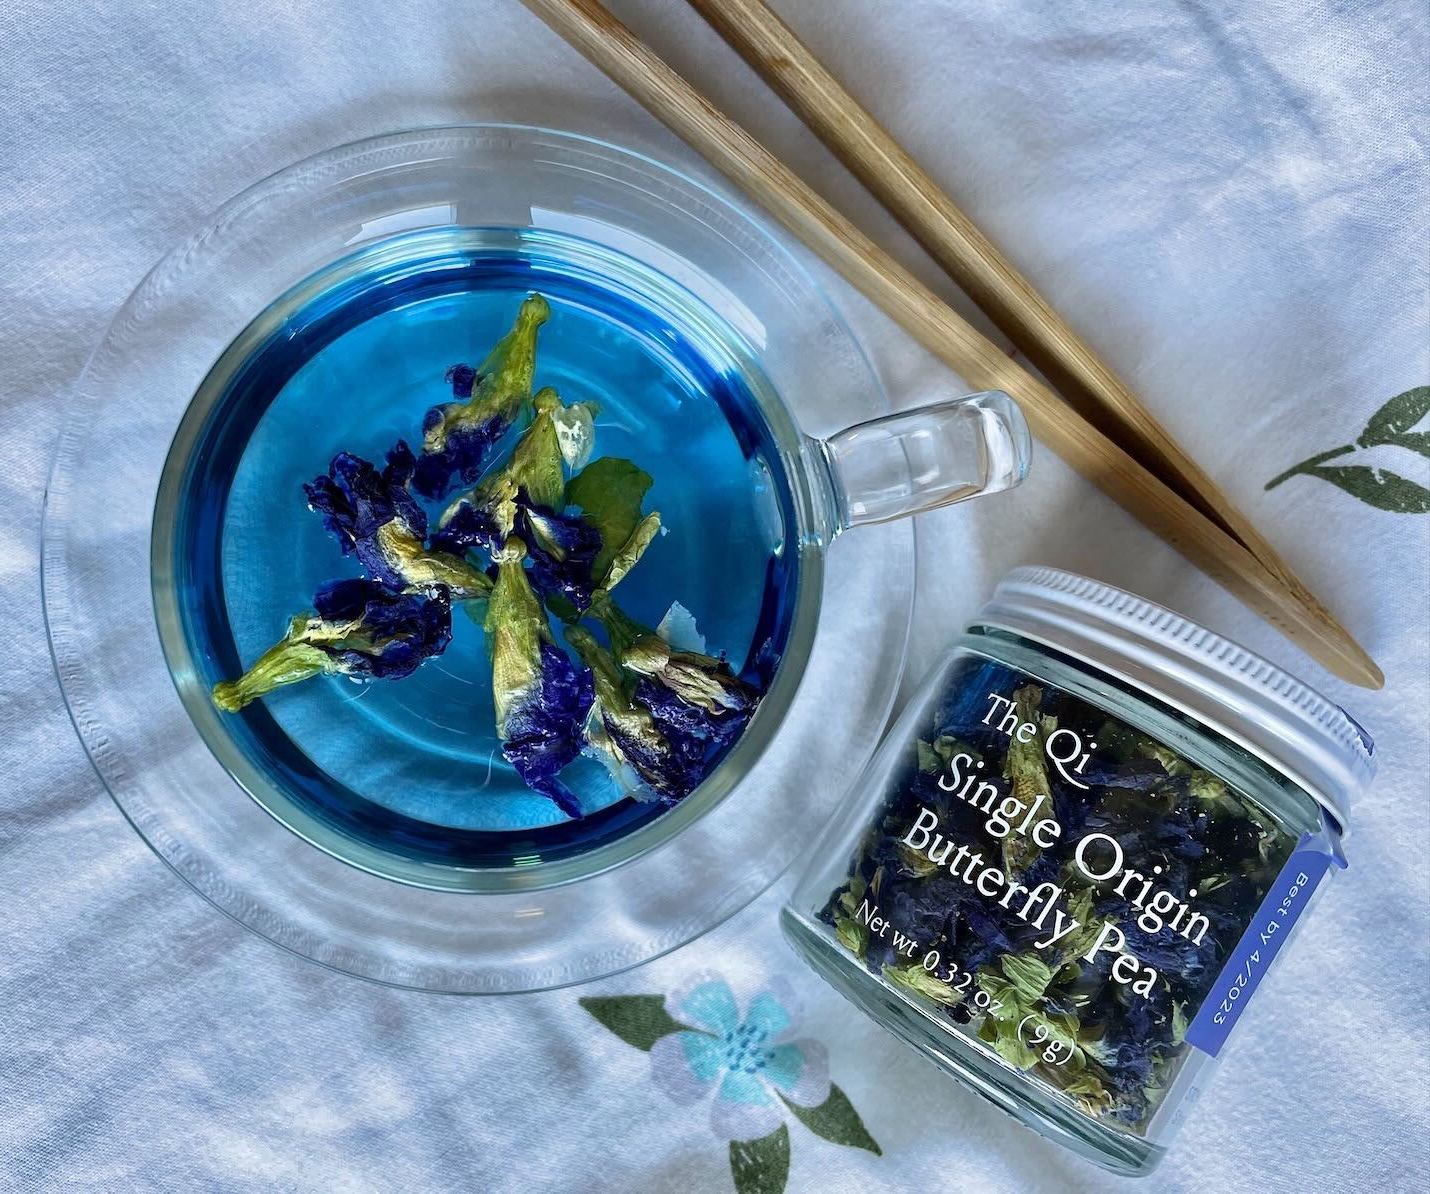 11 Benefits of Drinking Butterfly Pea Tea